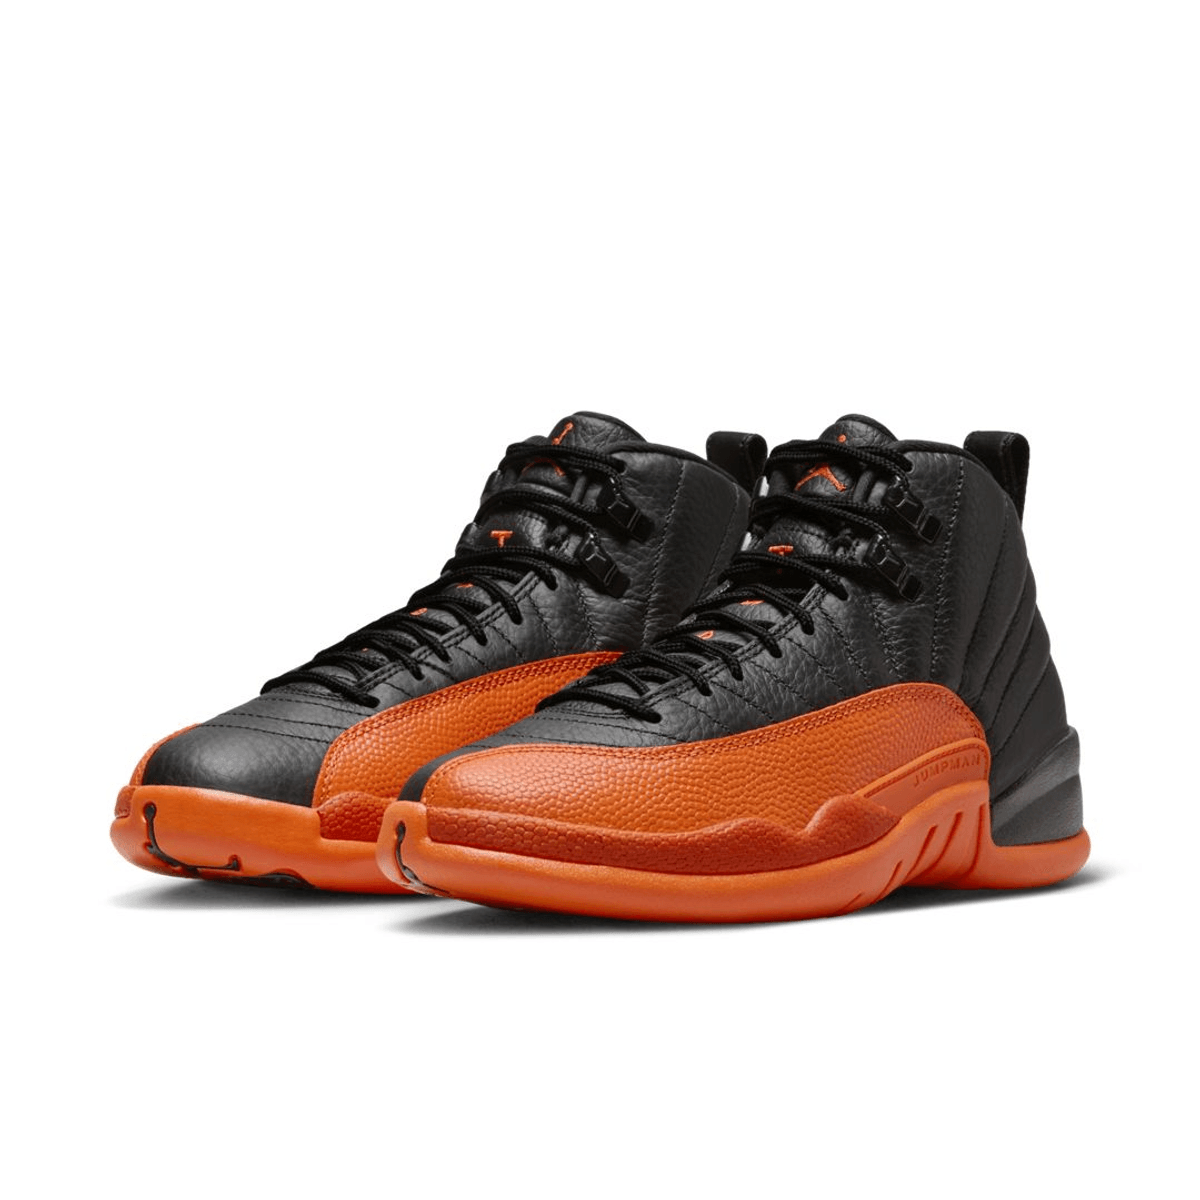 Brighten Up Your Sneaker Collection With The Air Jordan 12 Brilliant Orange